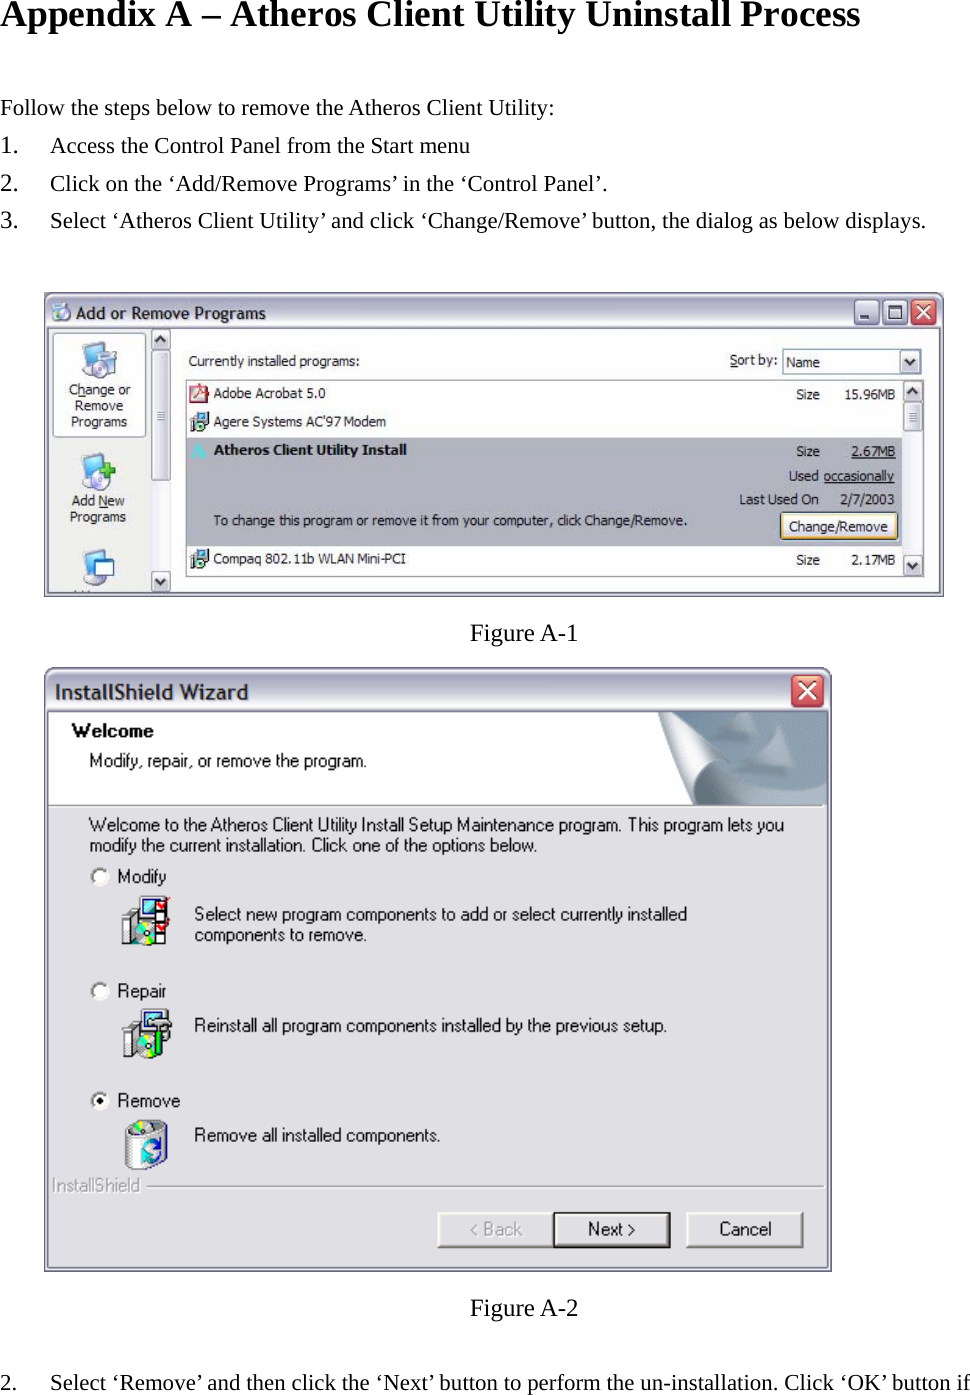 Appendix A – Atheros Client Utility Uninstall Process    Follow the steps below to remove the Atheros Client Utility: 1. Access the Control Panel from the Start menu 2. Click on the ‘Add/Remove Programs’ in the ‘Control Panel’.   3. Select ‘Atheros Client Utility’ and click ‘Change/Remove’ button, the dialog as below displays.   Figure A-1  Figure A-2  2.  Select ‘Remove’ and then click the ‘Next’ button to perform the un-installation. Click ‘OK’ button if 